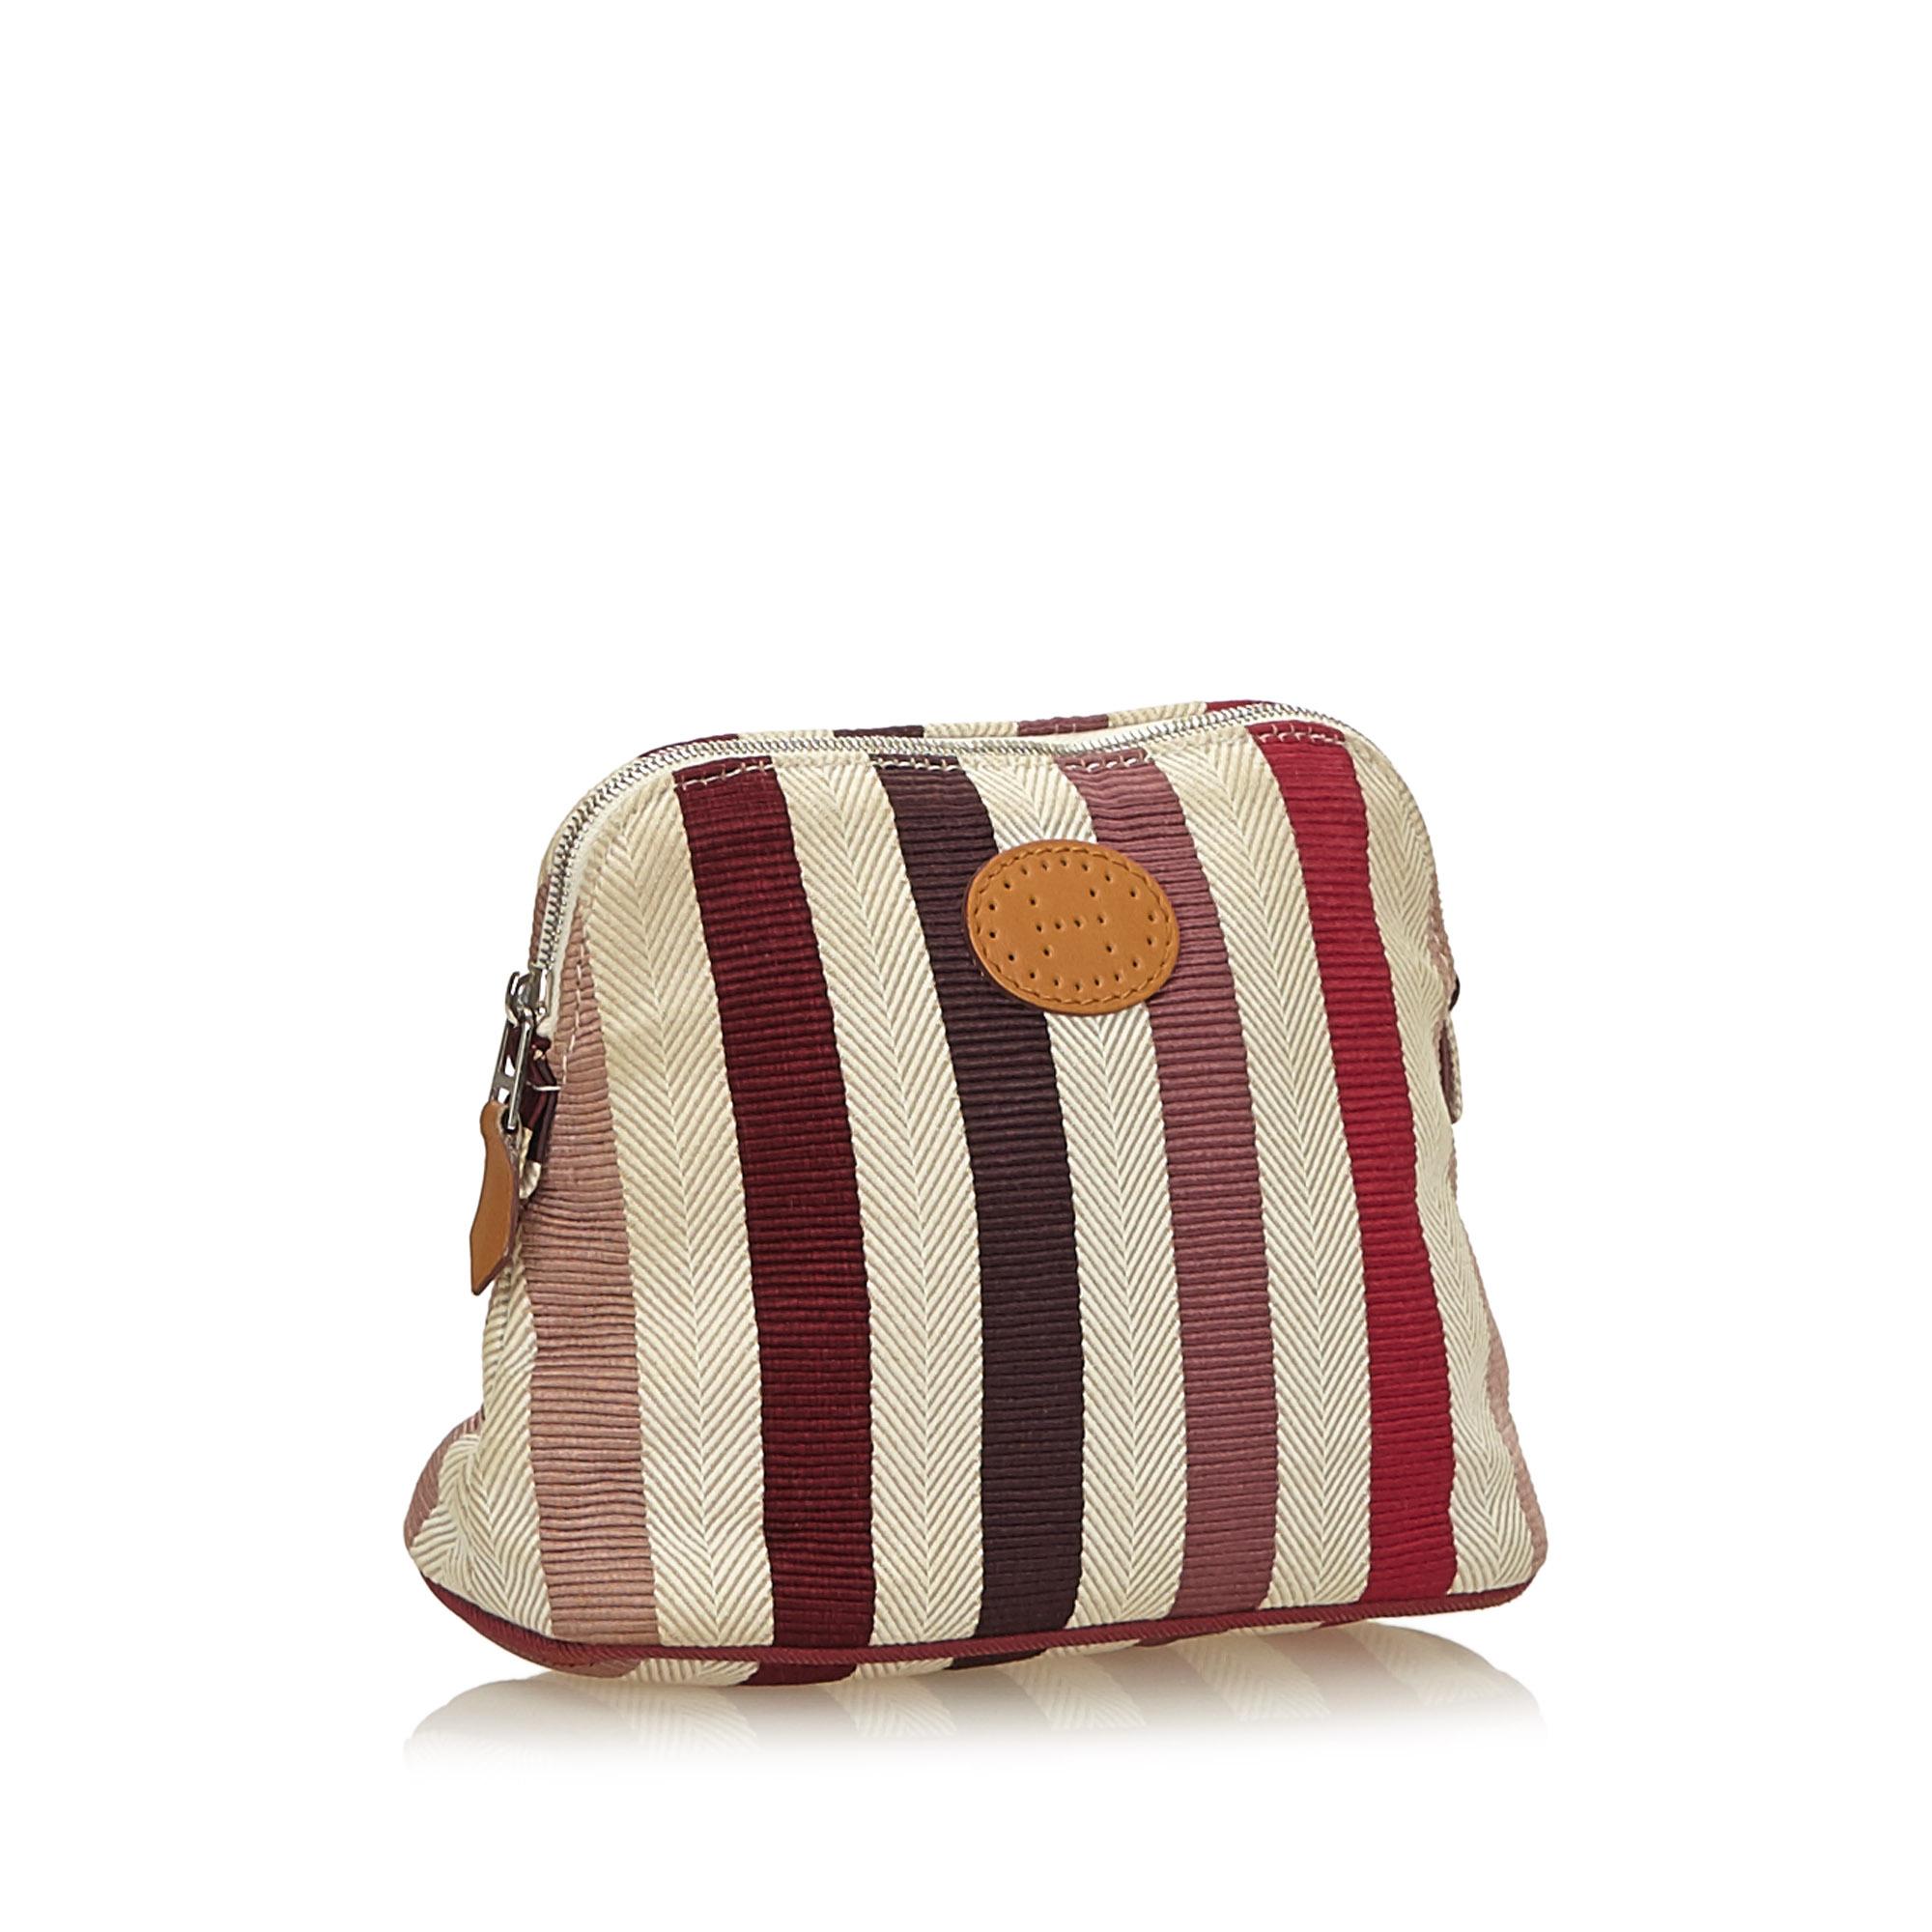 The Bolide Pouch features a cotton body and a top zip closure.

It carries a B+ condition rating.

Dimensions: 
Length 14.00 cm
Width 19.00 cm
Depth 7.00 cm

Inclusions: Box, 

Color: White x Ivory x Multi

Material: Fabric x Cotton

Country of